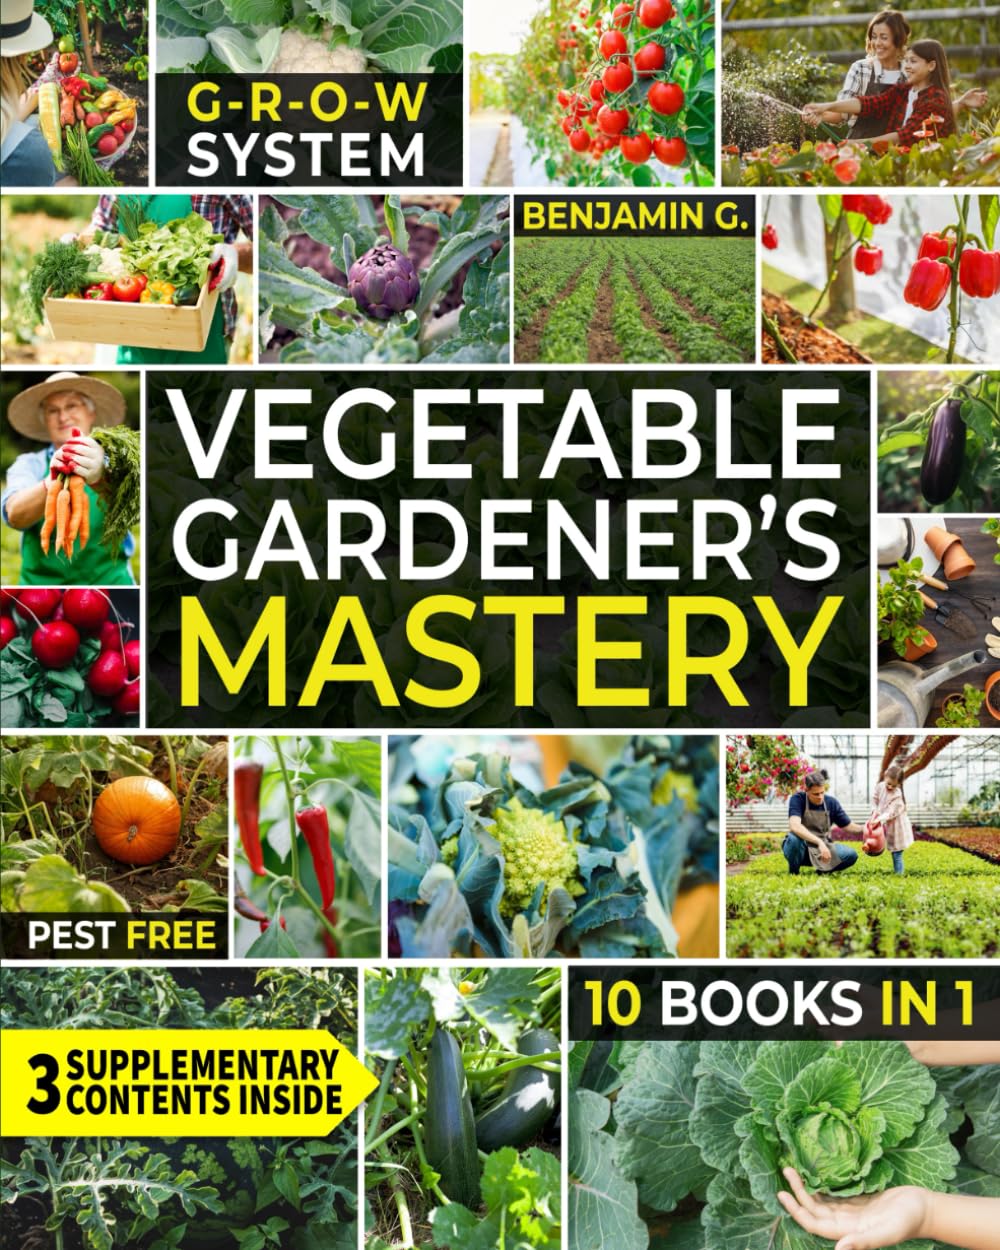 Vegetable Gardener's Mastery [10 Books in 1]: Unlock the Power of the G.R.O.W. System for High-Yield Organic Gardening. Proven Techniques & Expert Secrets. Your Essential Guide for Bountiful Harvests